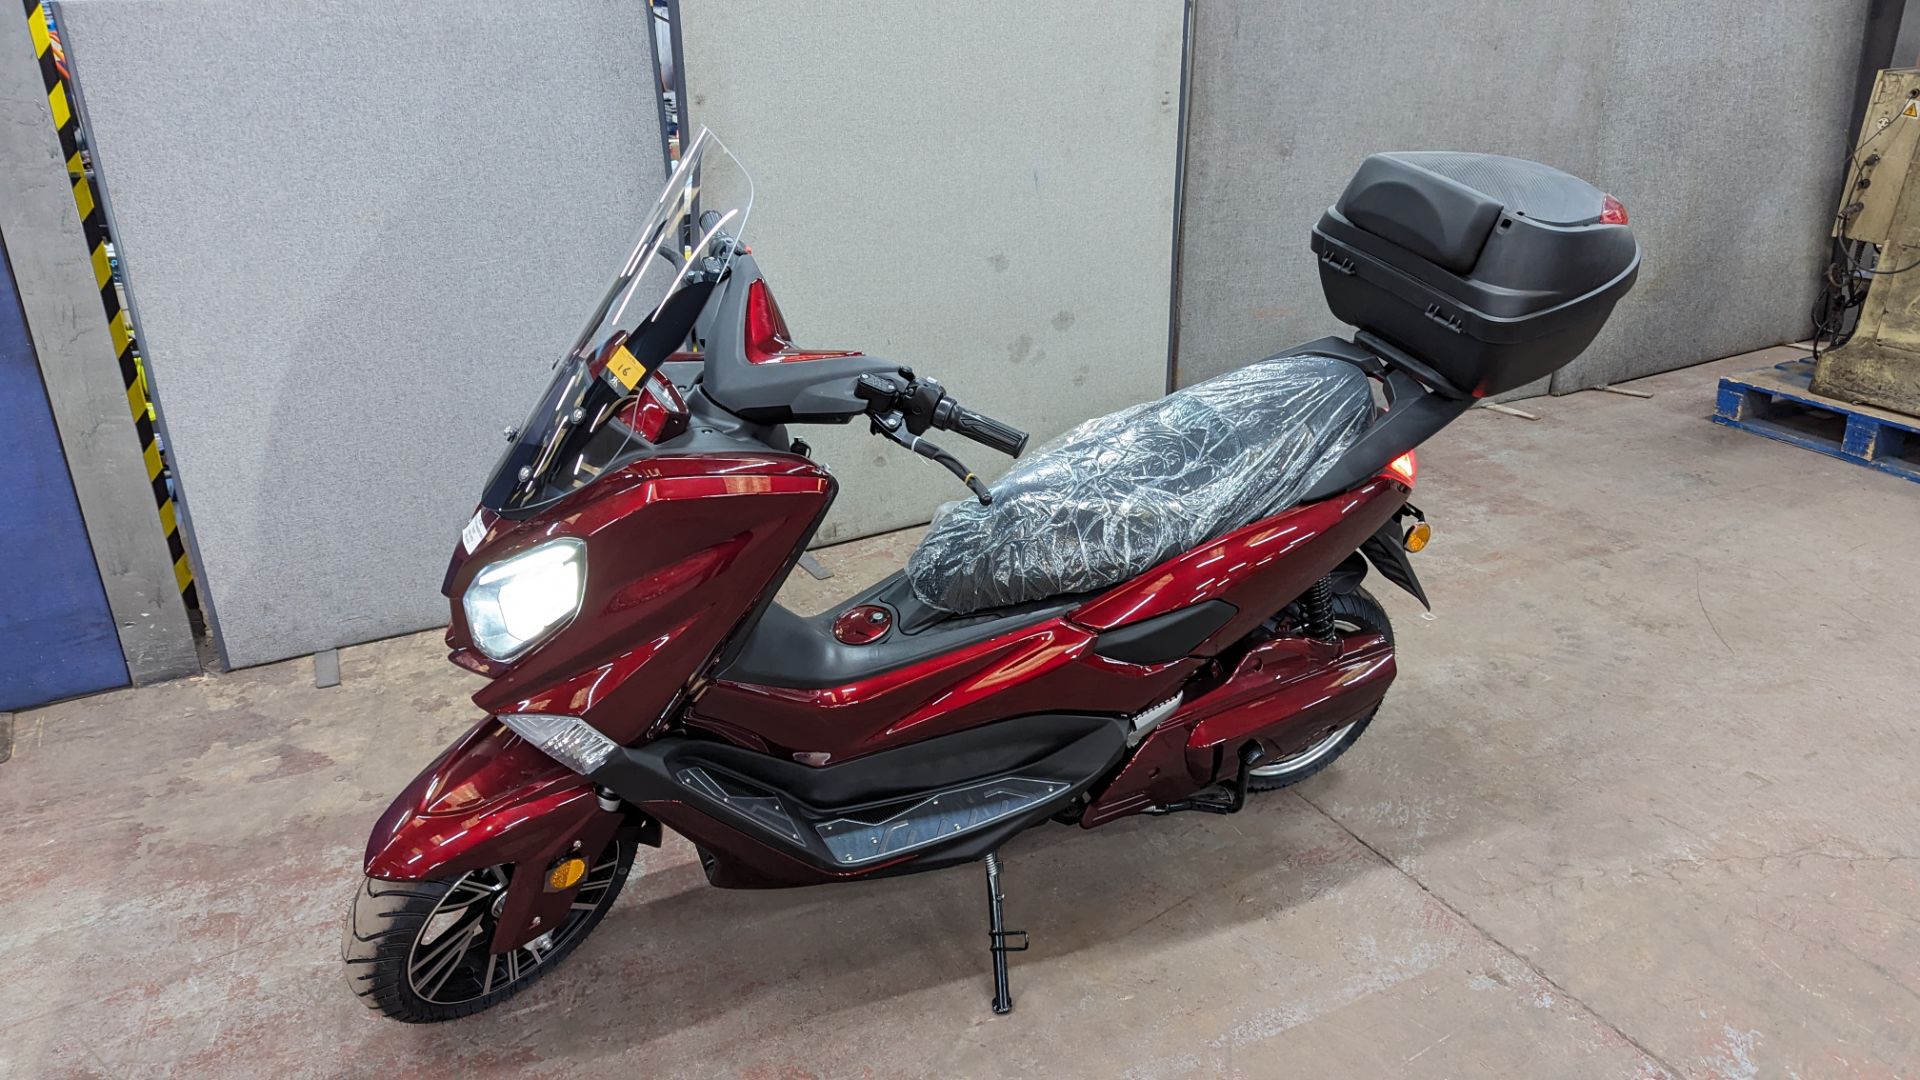 Model 65 Electric High Power Motorbike: Delivery Miles (only 1 recorded km), wine red body with blac